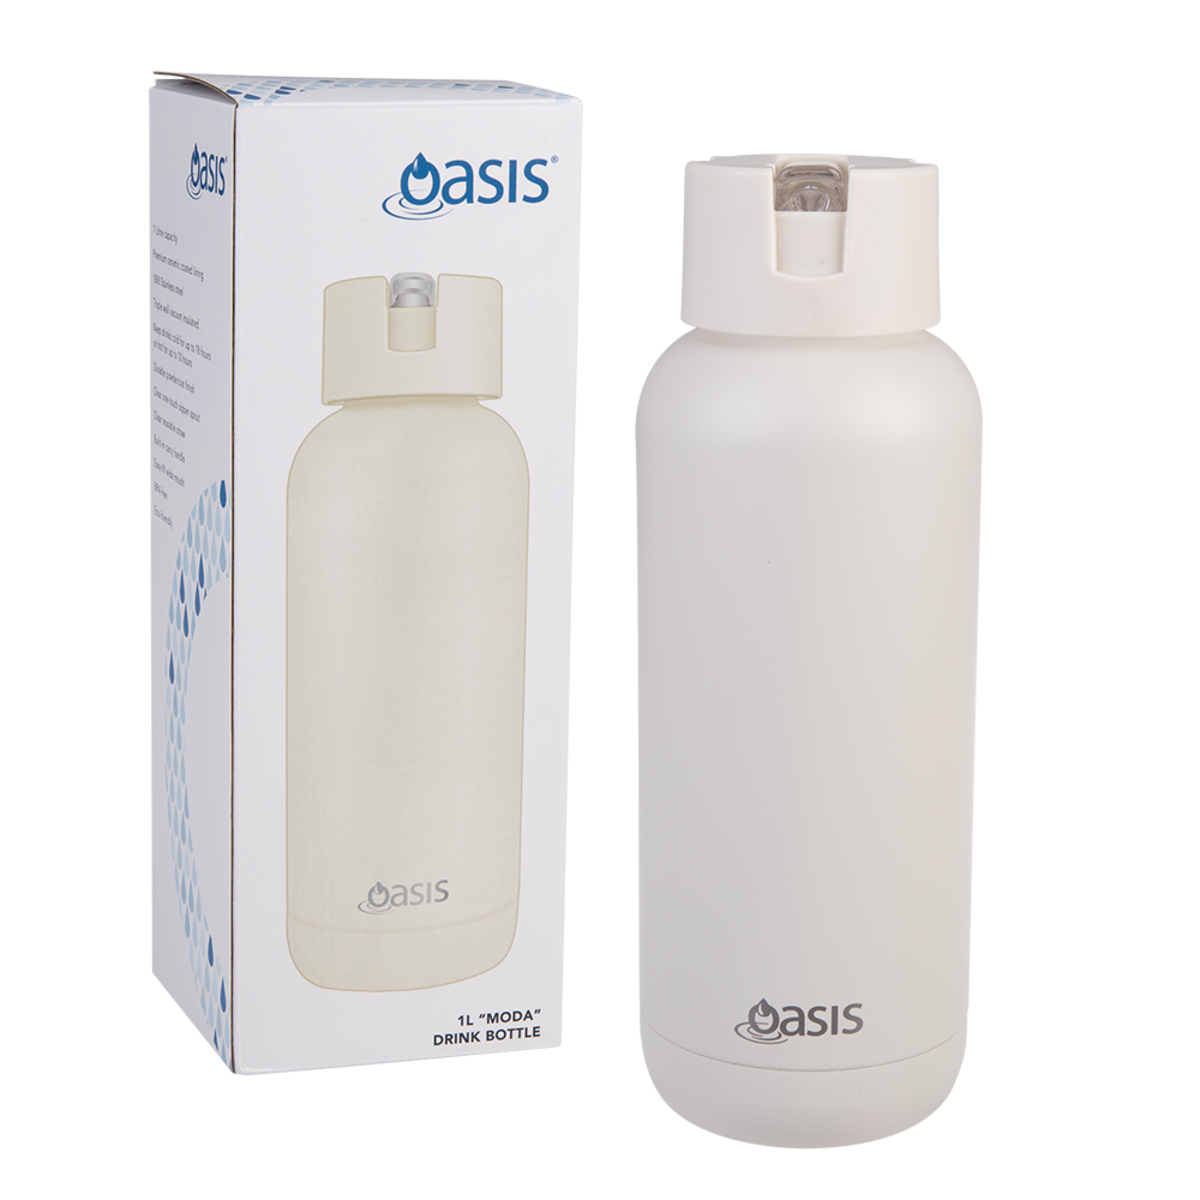 Oasis "moda" Ceramic Lined S/s Triple Wall Insulated Drink Bottle 1l - Alabaster